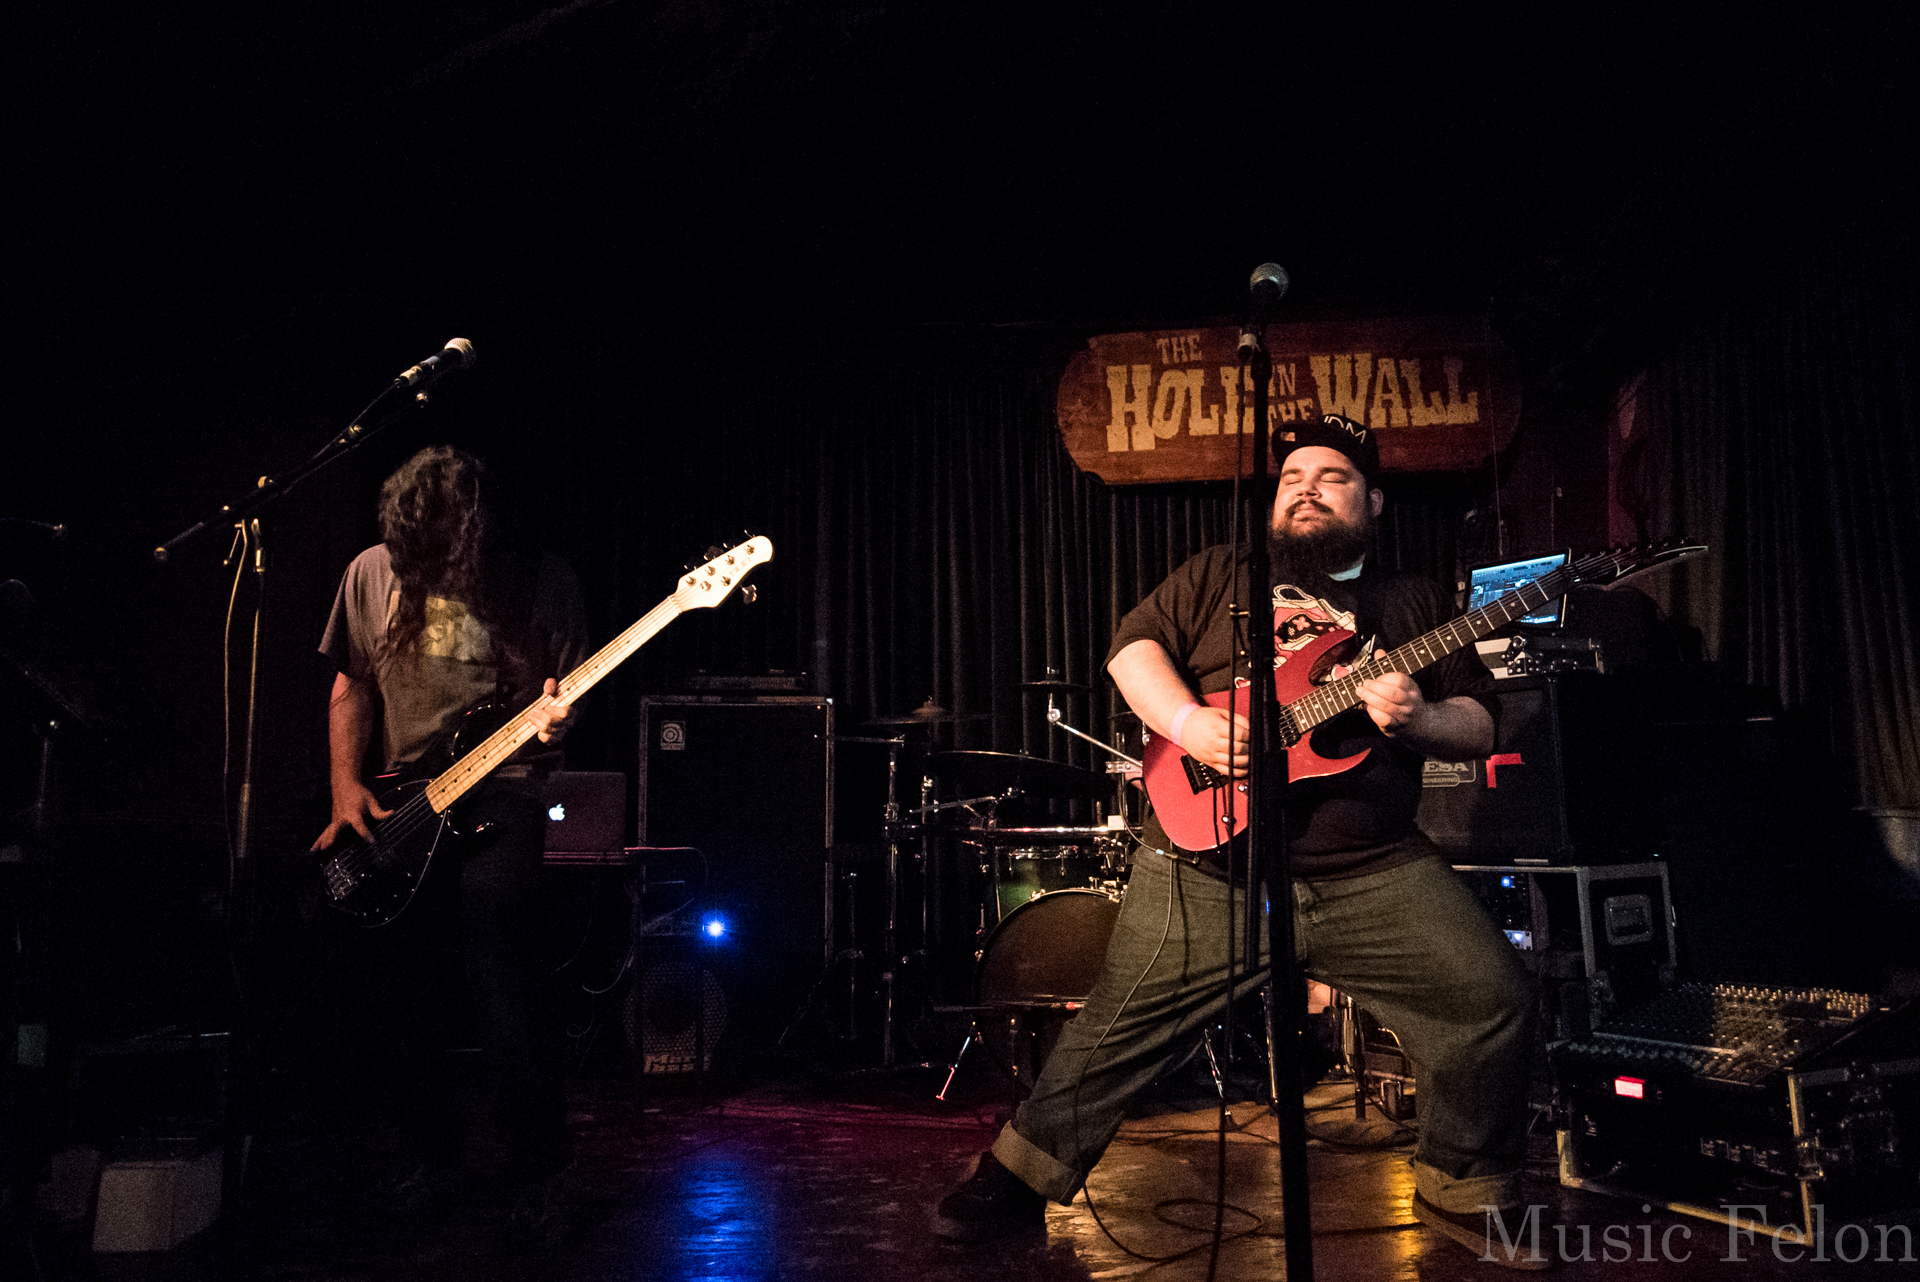 Bitforce, 9/29/2015, The Hole in the Wall, Austin: Photos